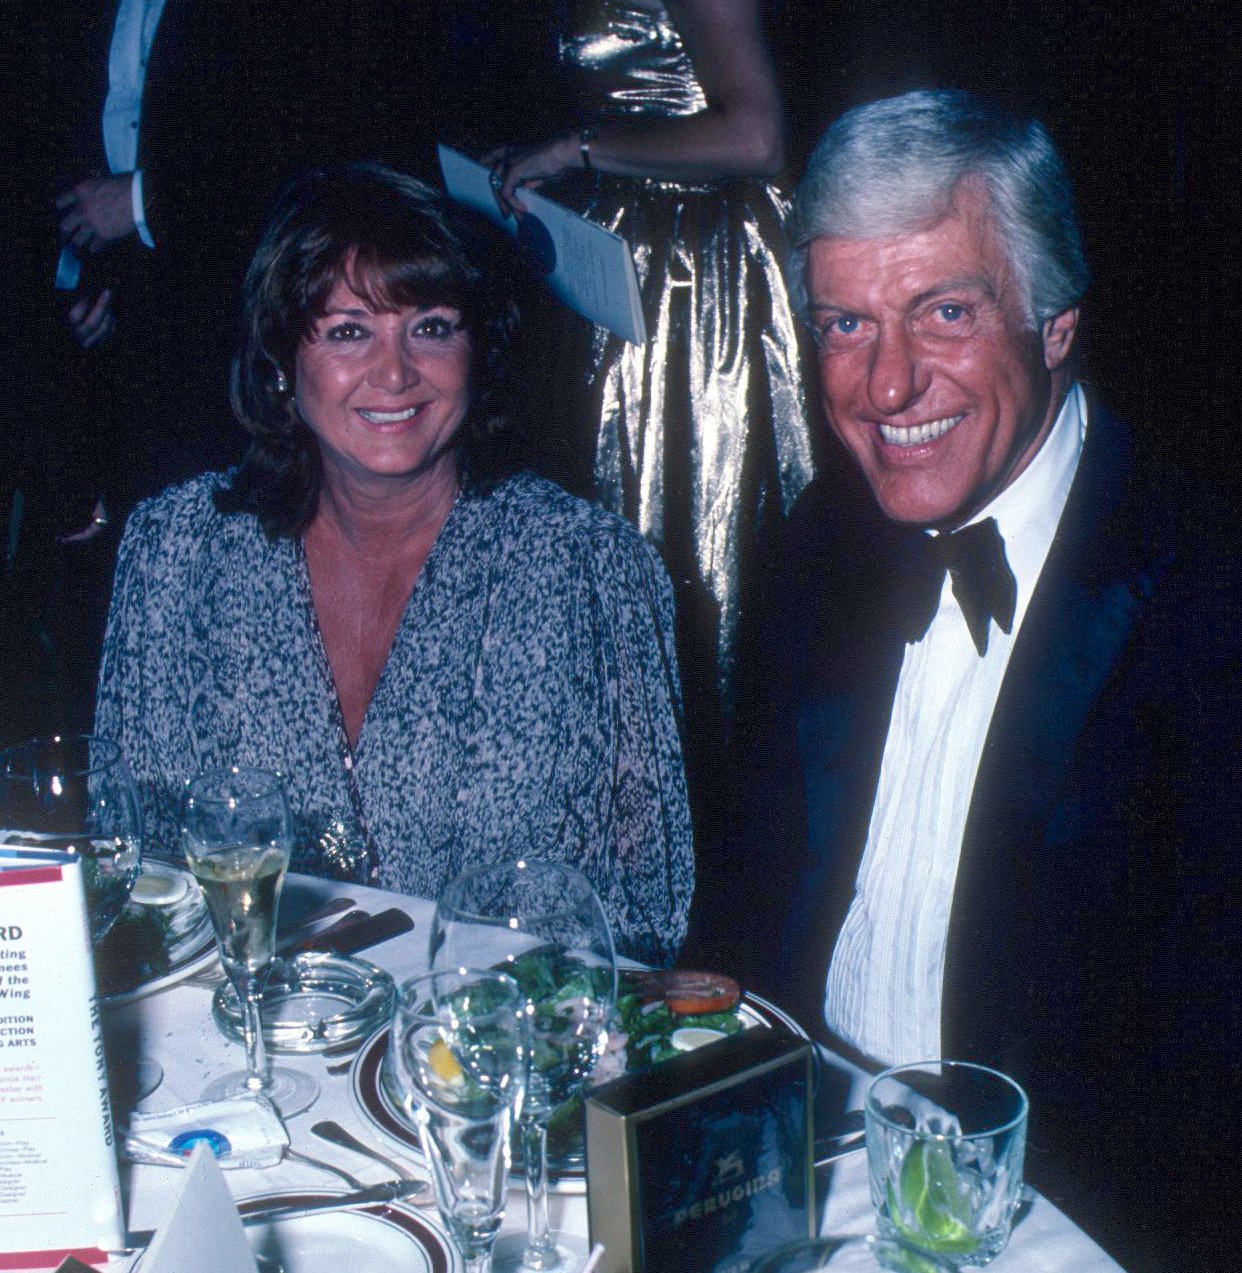 Dick Van Dyke and Michelle Triola attend the 39th Annual Tony Awards at the Shubert Theater in New York City on June 2, 1985. | Source : Getty Images